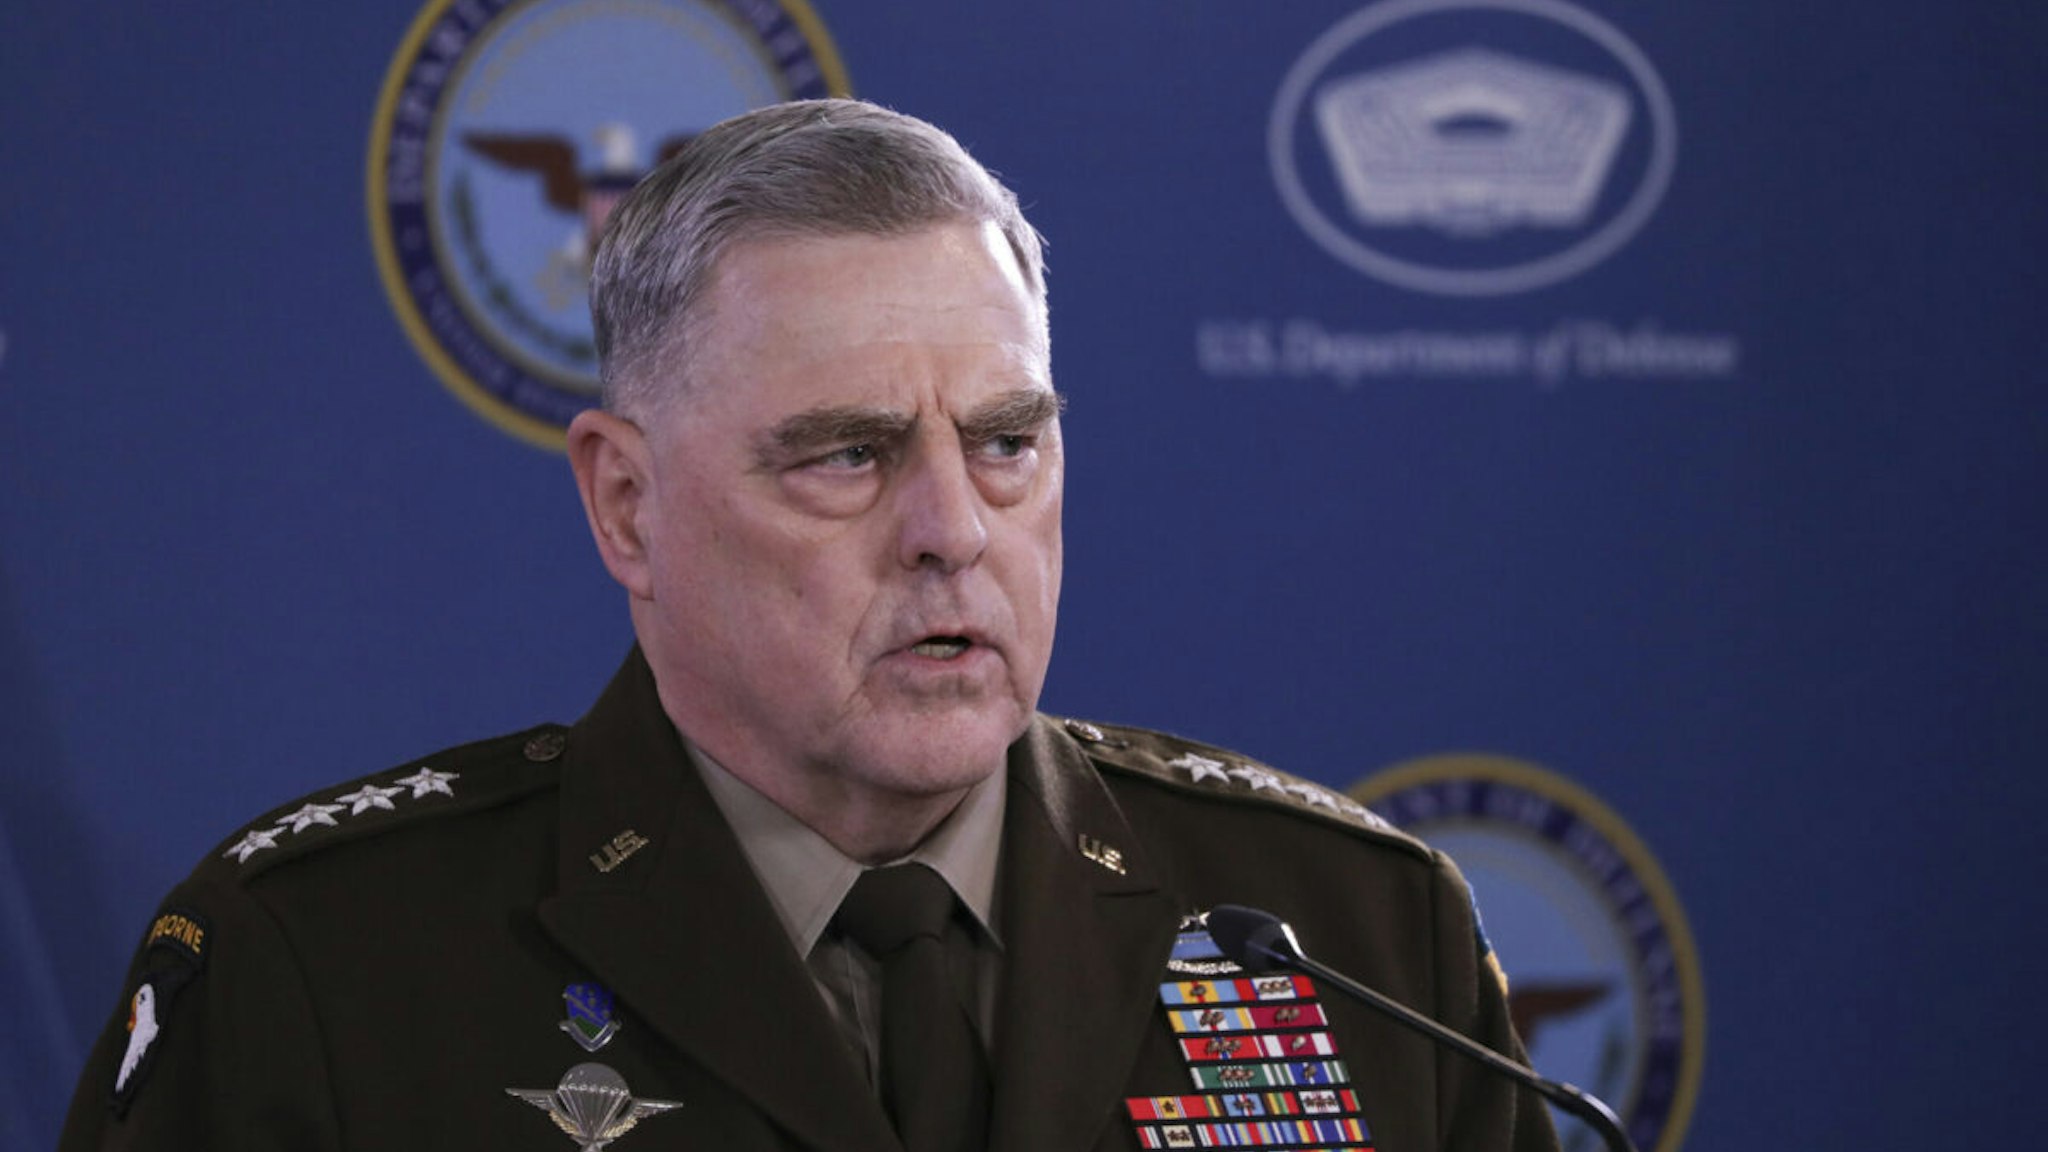 US Chairman of the Joint Chiefs of Staff General Mark Milley and U.S Defense Secretary Lloyd Austin (not seen) hold a joint press conference in Pentagon Arlington-Virginia, United States on March 15, 2023.